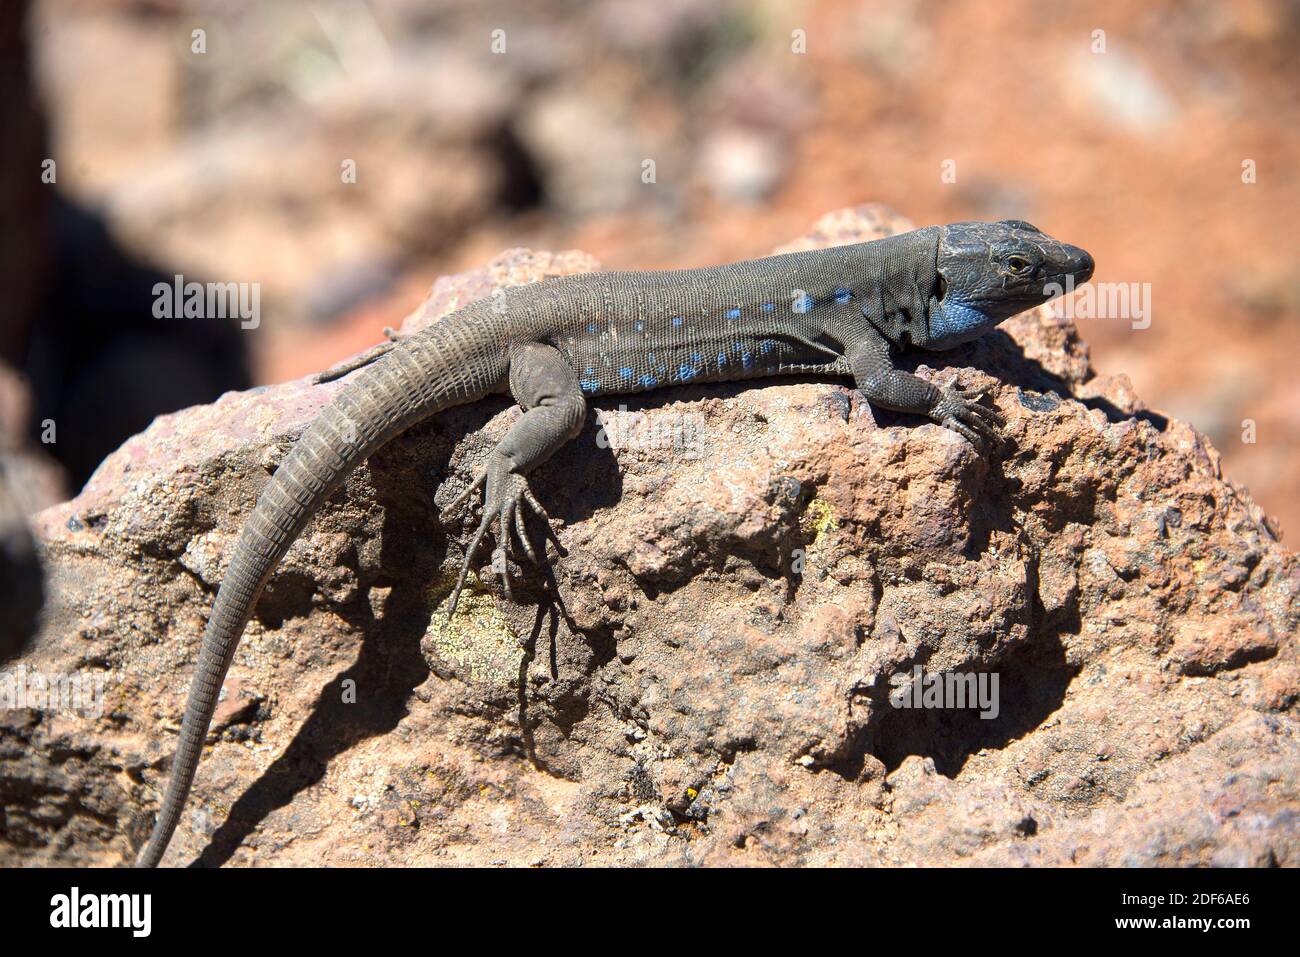 Gallot lizard or western Canaries lizard (Gallotia galloti) is endemic from Teneriffa and La Palma,. Canary islands. This picture was taken in El Stock Photo